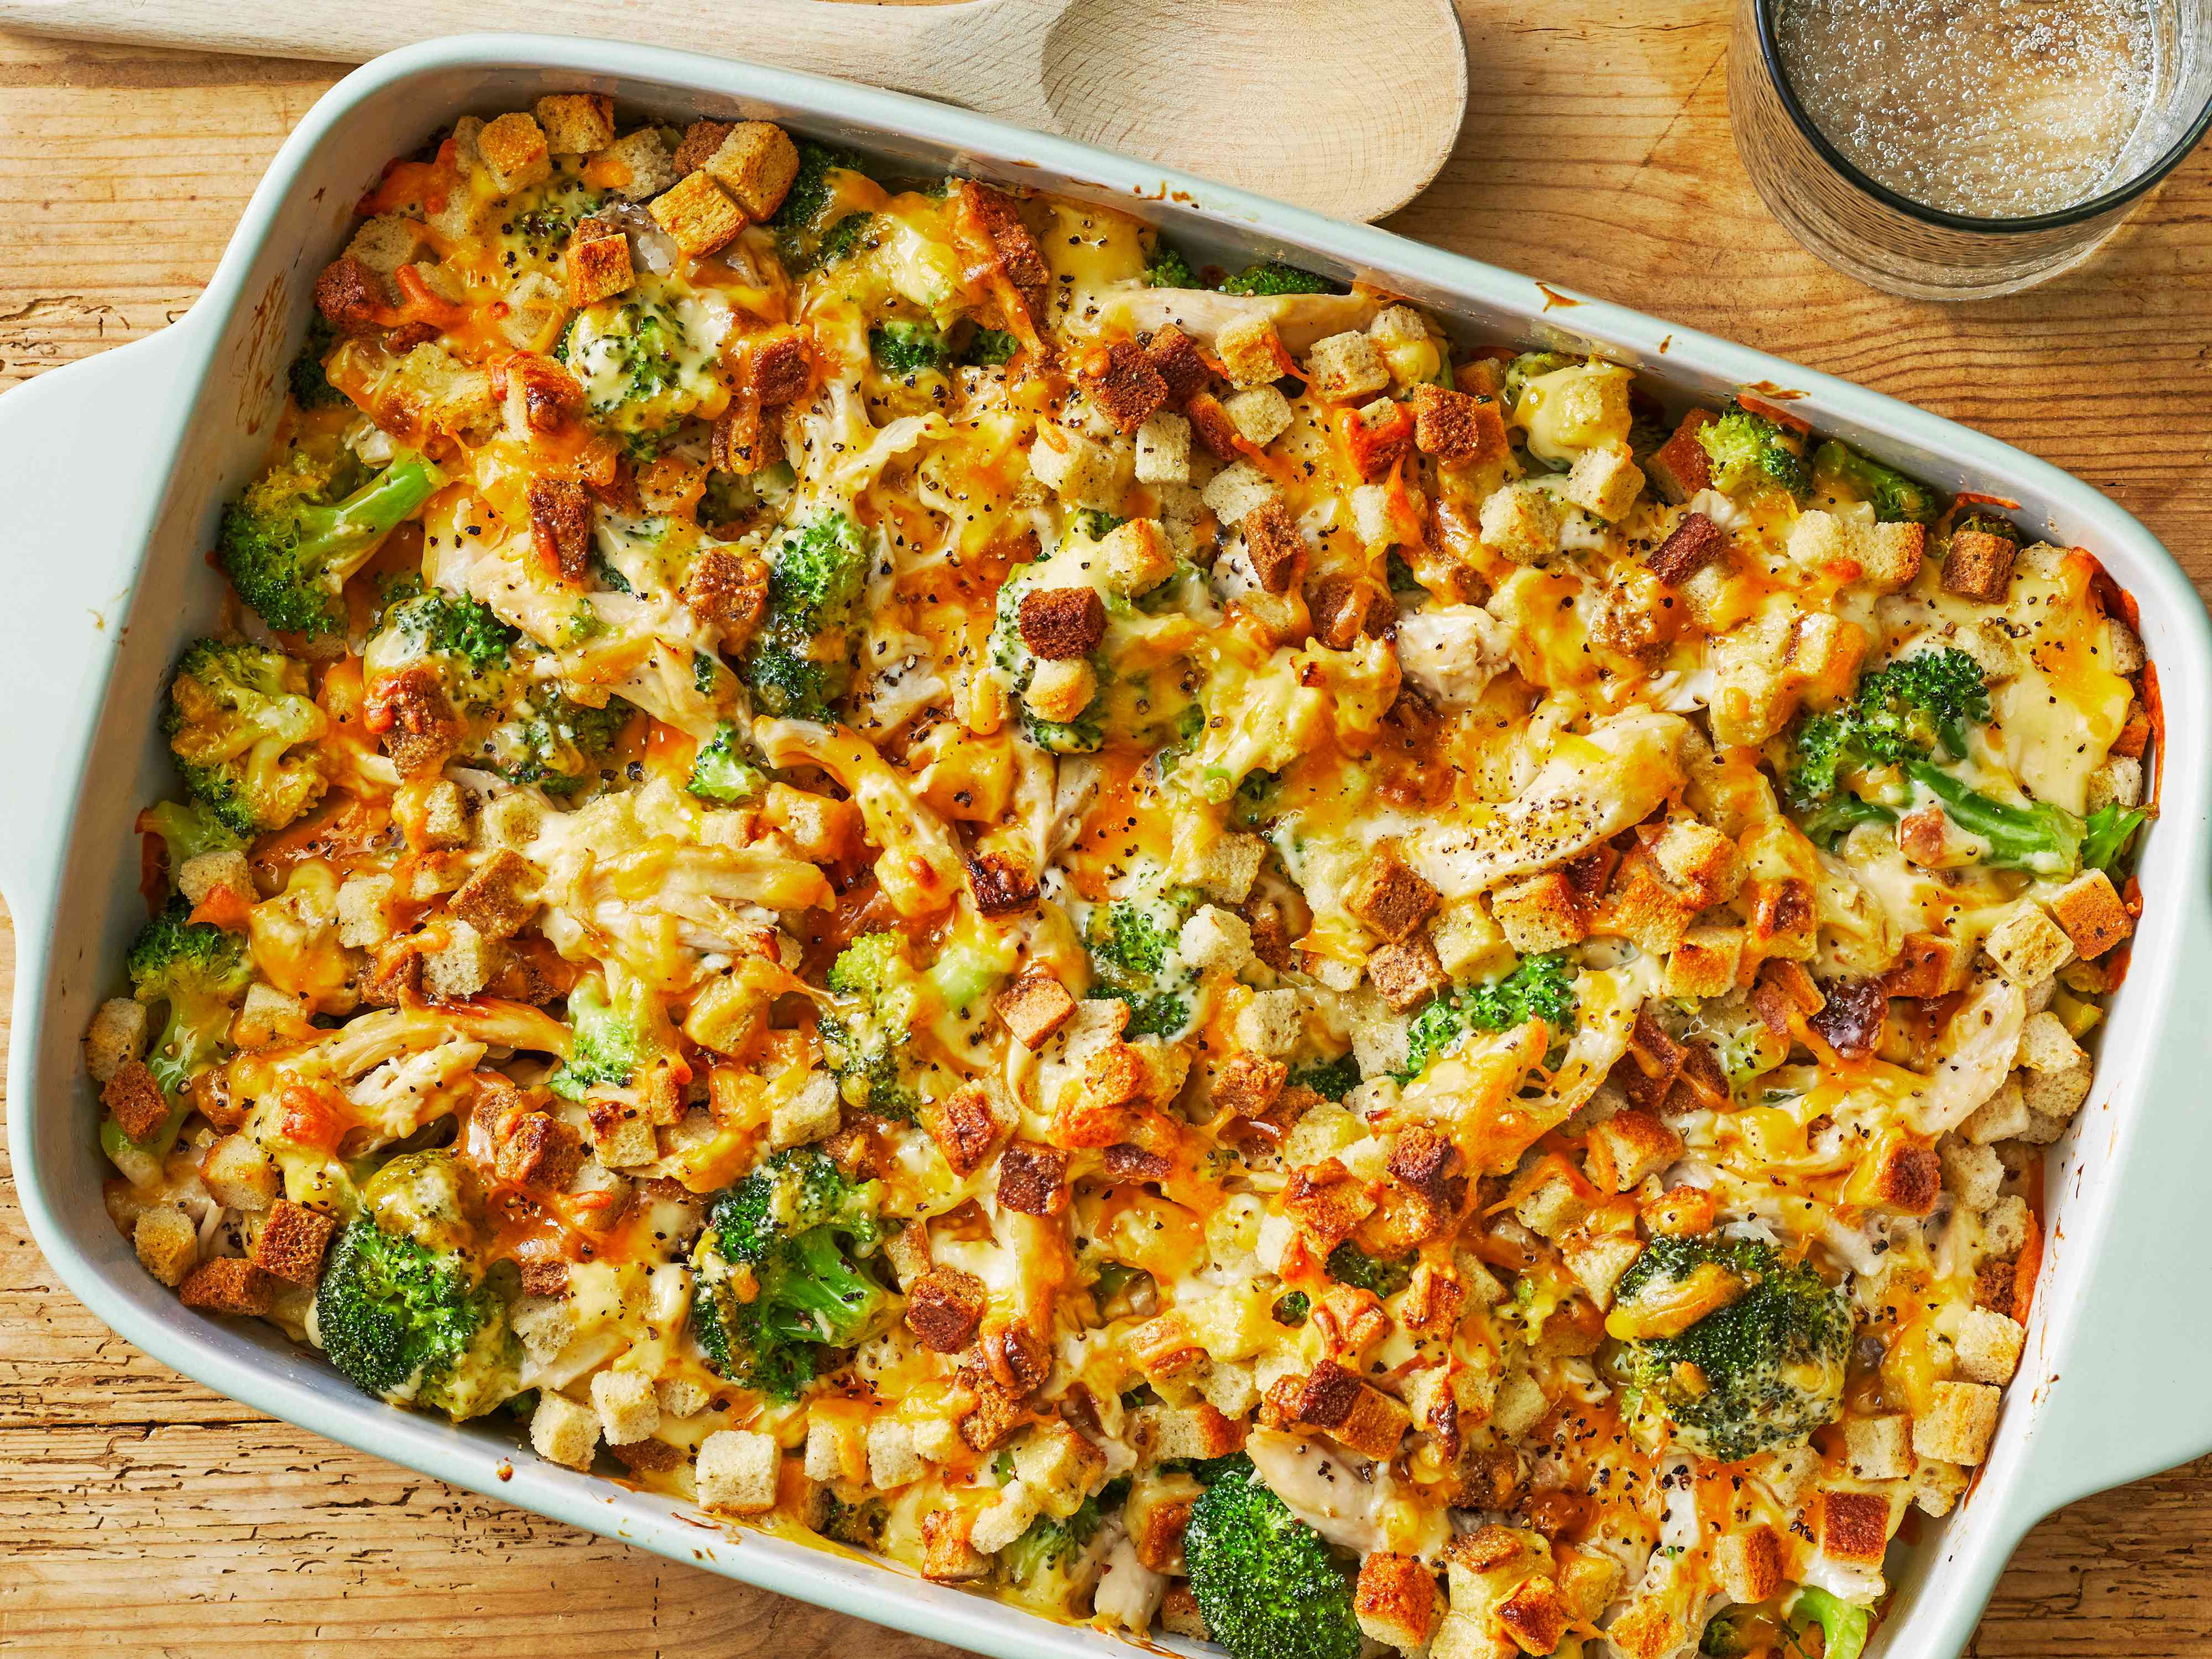 30 Chicken and Broccoli Dinners You’ll Come Back to Again and Again